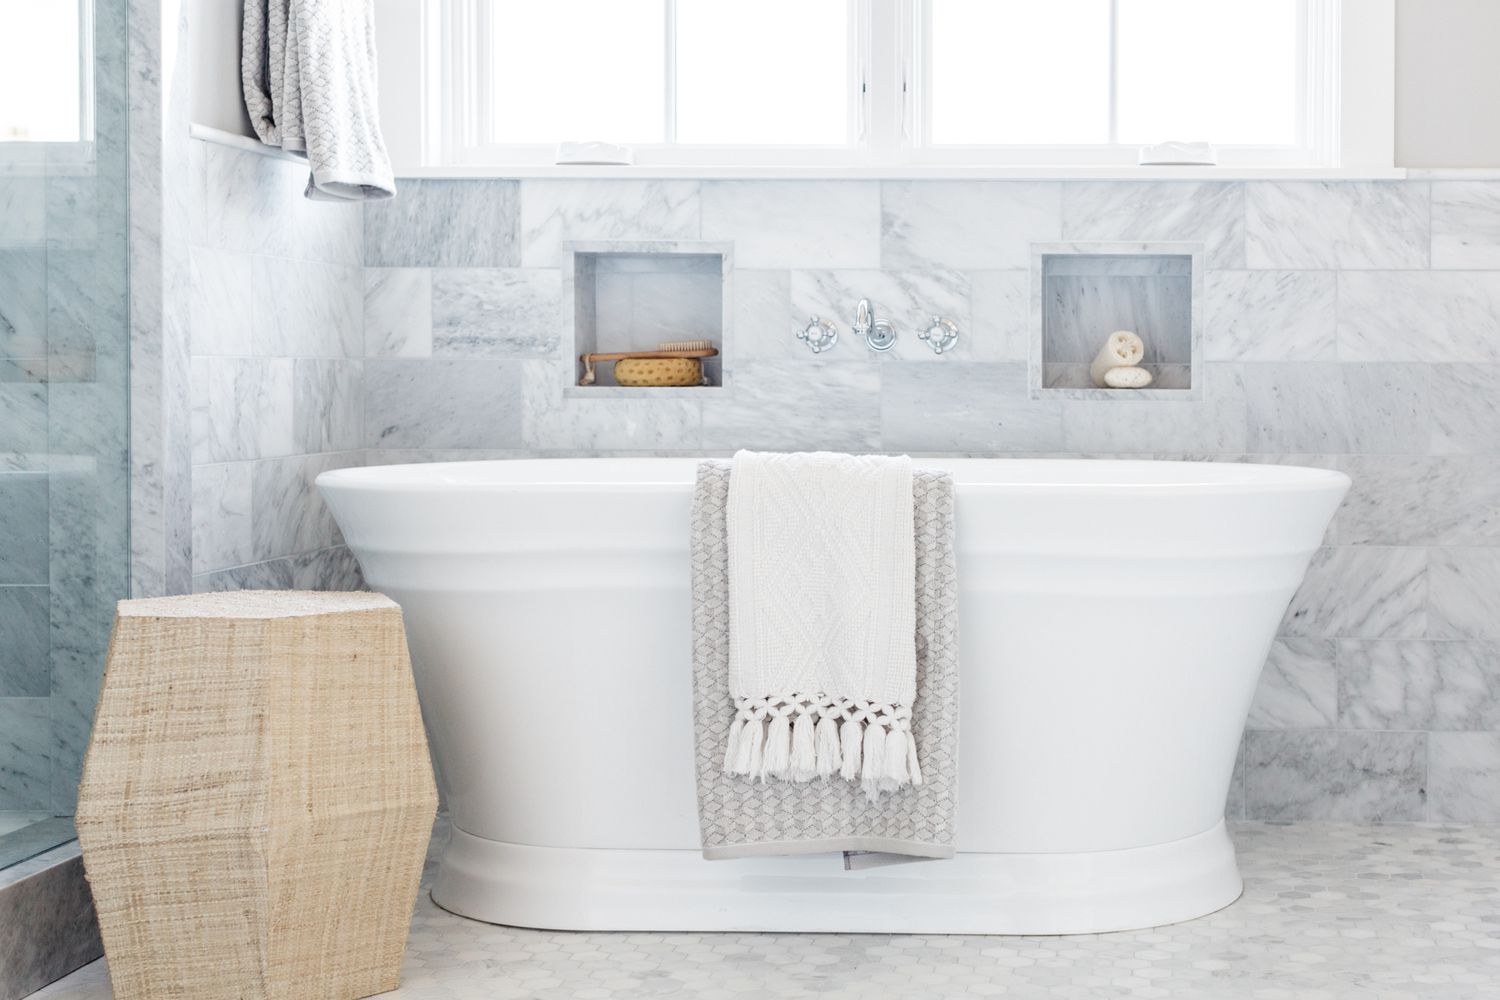 What Is The Best Material For A Bathtub?